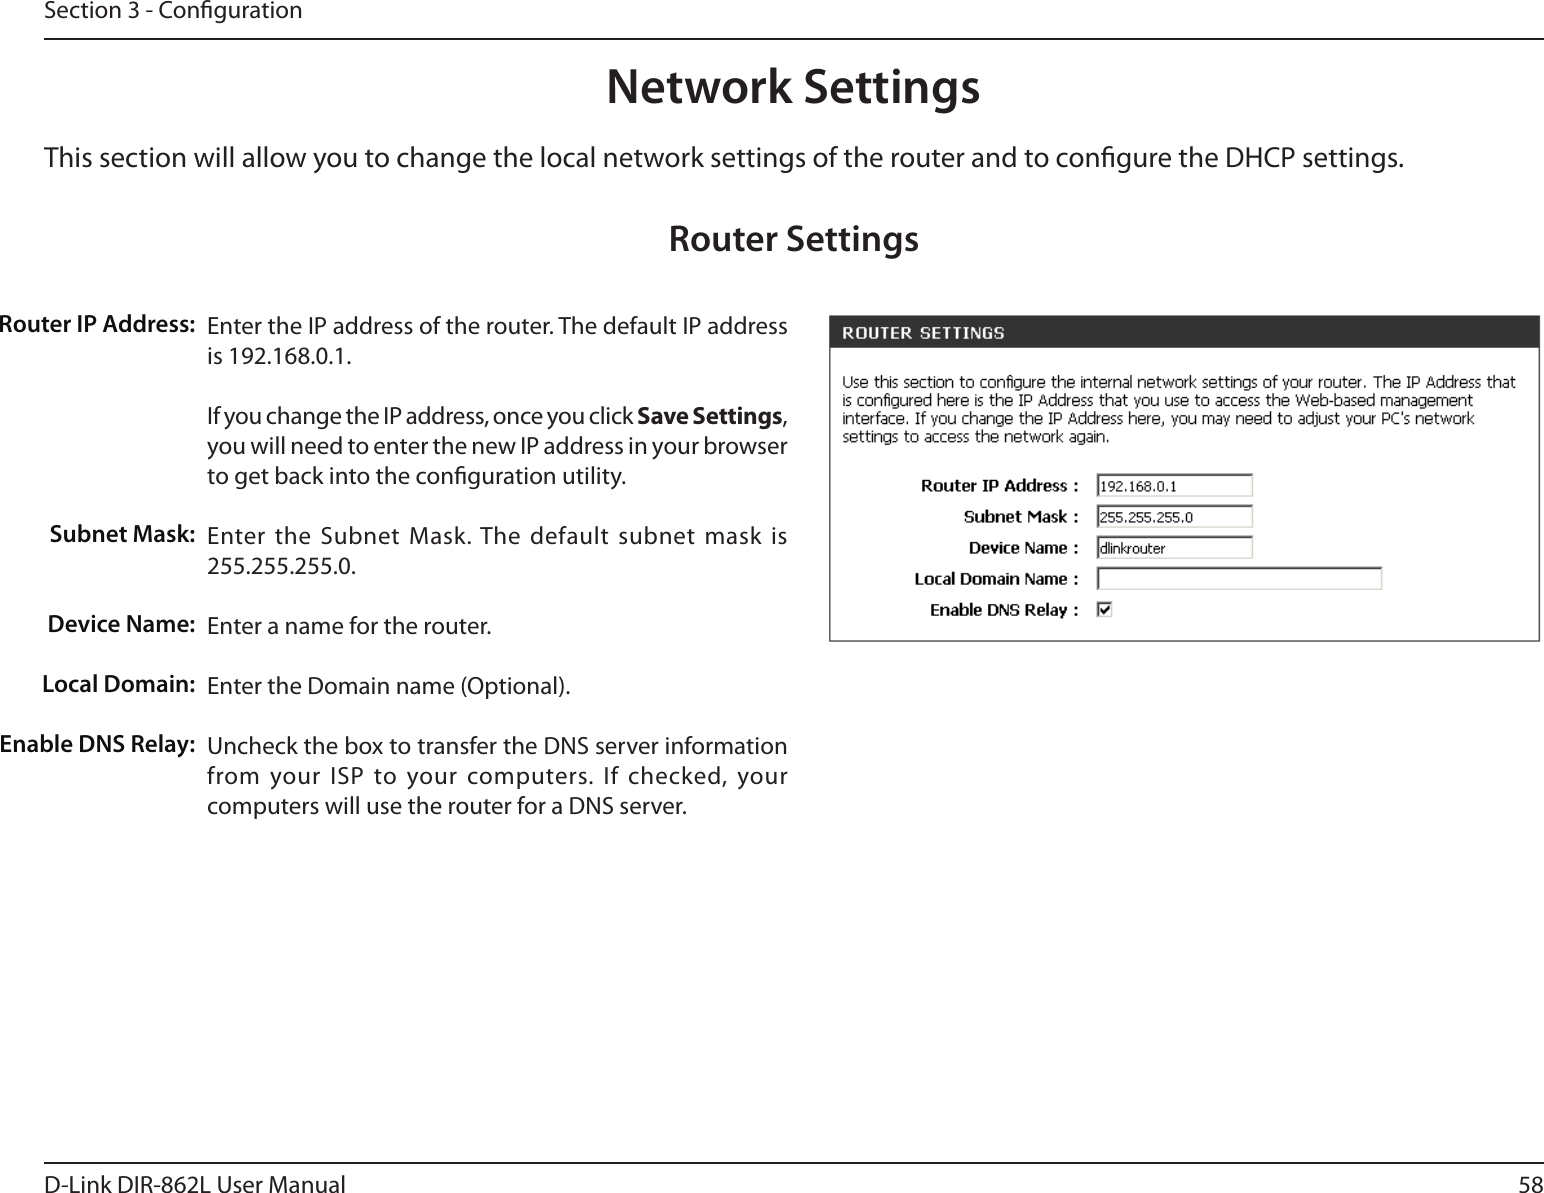 58D-Link DIR-862L User ManualSection 3 - CongurationThis section will allow you to change the local network settings of the router and to congure the DHCP settings.Network SettingsEnter the IP address of the router. The default IP address is 192.168.0.1.If you change the IP address, once you click Save Settings, you will need to enter the new IP address in your browser to get back into the conguration utility.Enter the Subnet Mask. The default subnet mask is 255.255.255.0.Enter a name for the router.Enter the Domain name (Optional).Uncheck the box to transfer the DNS server information from your ISP to your computers. If checked, your computers will use the router for a DNS server.Router IP Address:Subnet Mask:Device Name:Local Domain:Enable DNS Relay:Router Settings